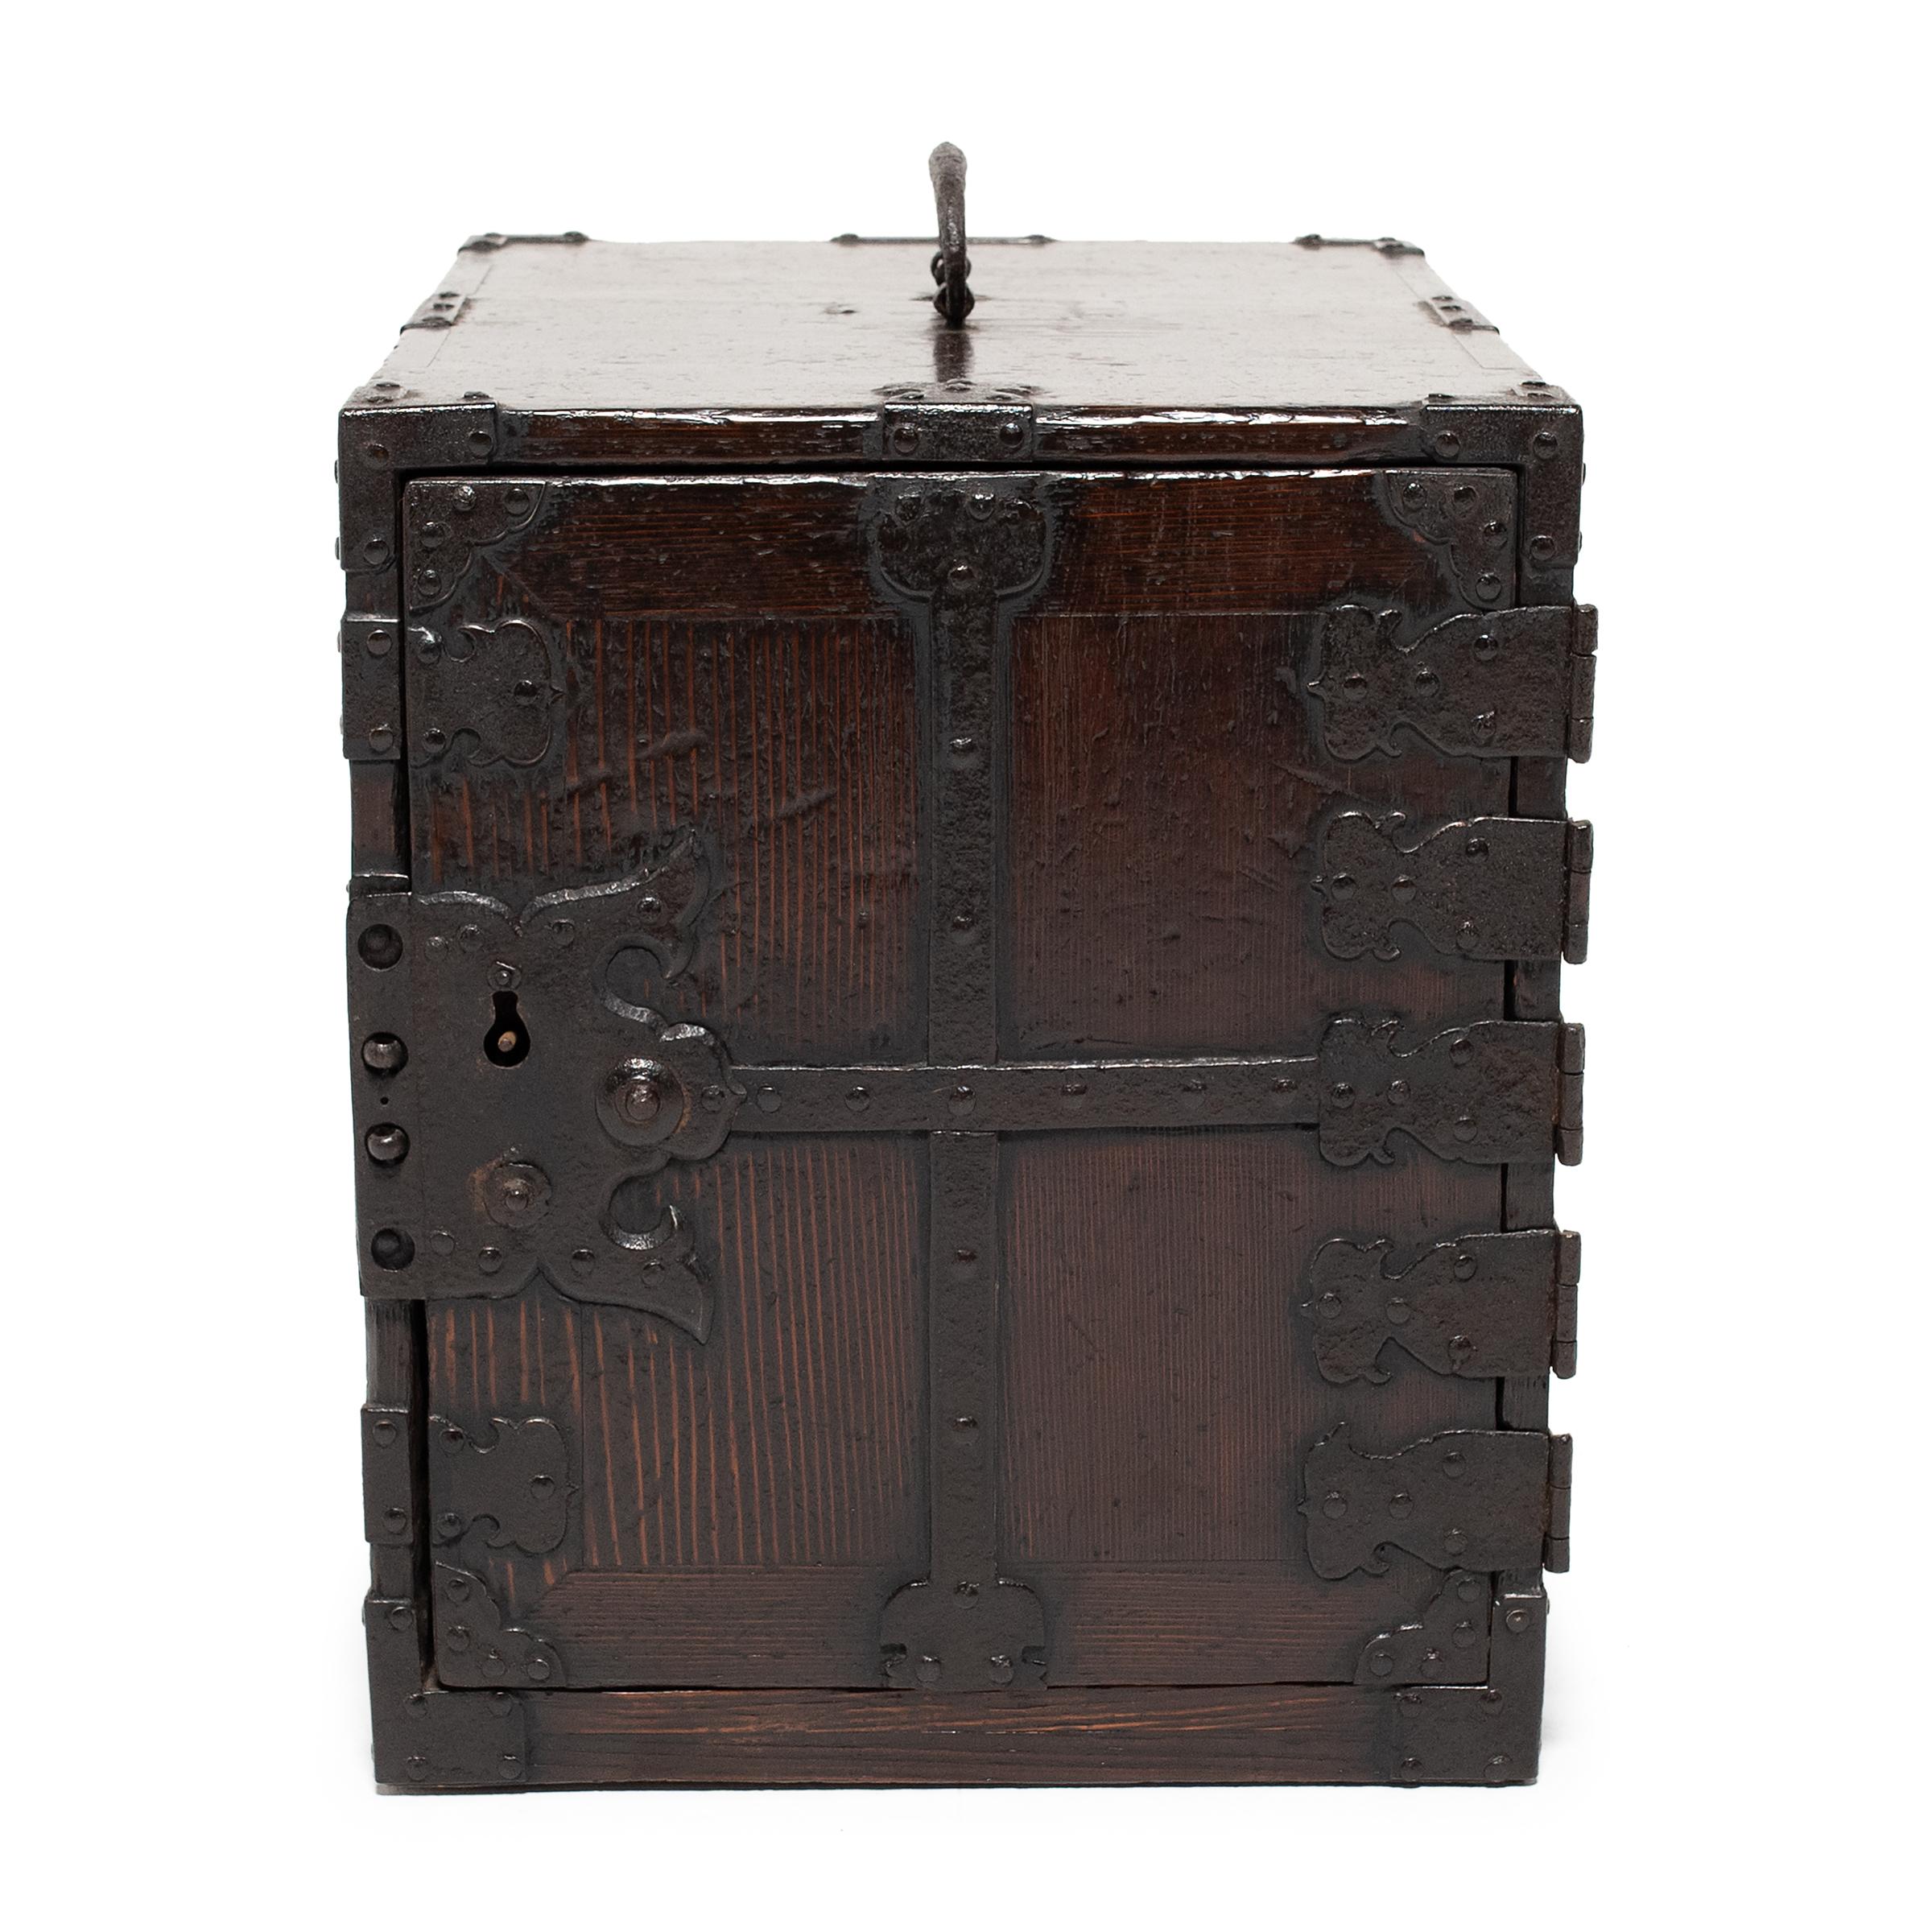 This fantastic iron-bound lock box is a 19th-century Japanese sea chest known as kakesuzuri. Used on merchant vessels traveling the Japanese trade route known as Kitamae, sea chests were built to withstand bad weather and tumultuous currents, almost